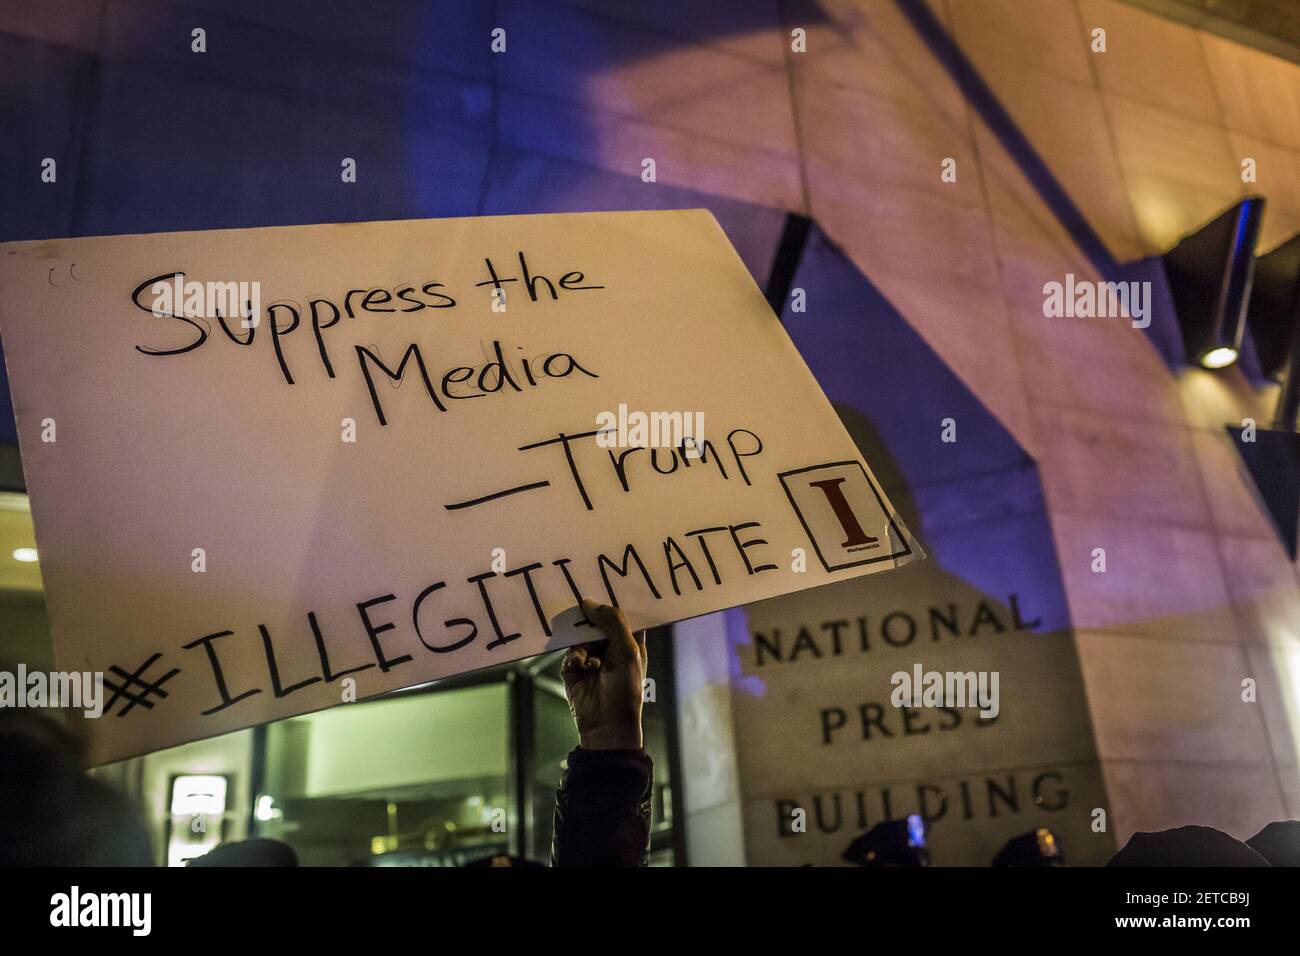 On the eve before Donald Trump is sworn in as the 45th President of the United States, in a pre-inauguration protest on January 19, 2017, hundreds of activists surrounded the Alt-Right 'Deploraball,' which was taking place inside the National Press Club in Washington D.C. (Photo by Michael Nigro) *** Please Use Credit from Credit Field *** Stock Photo